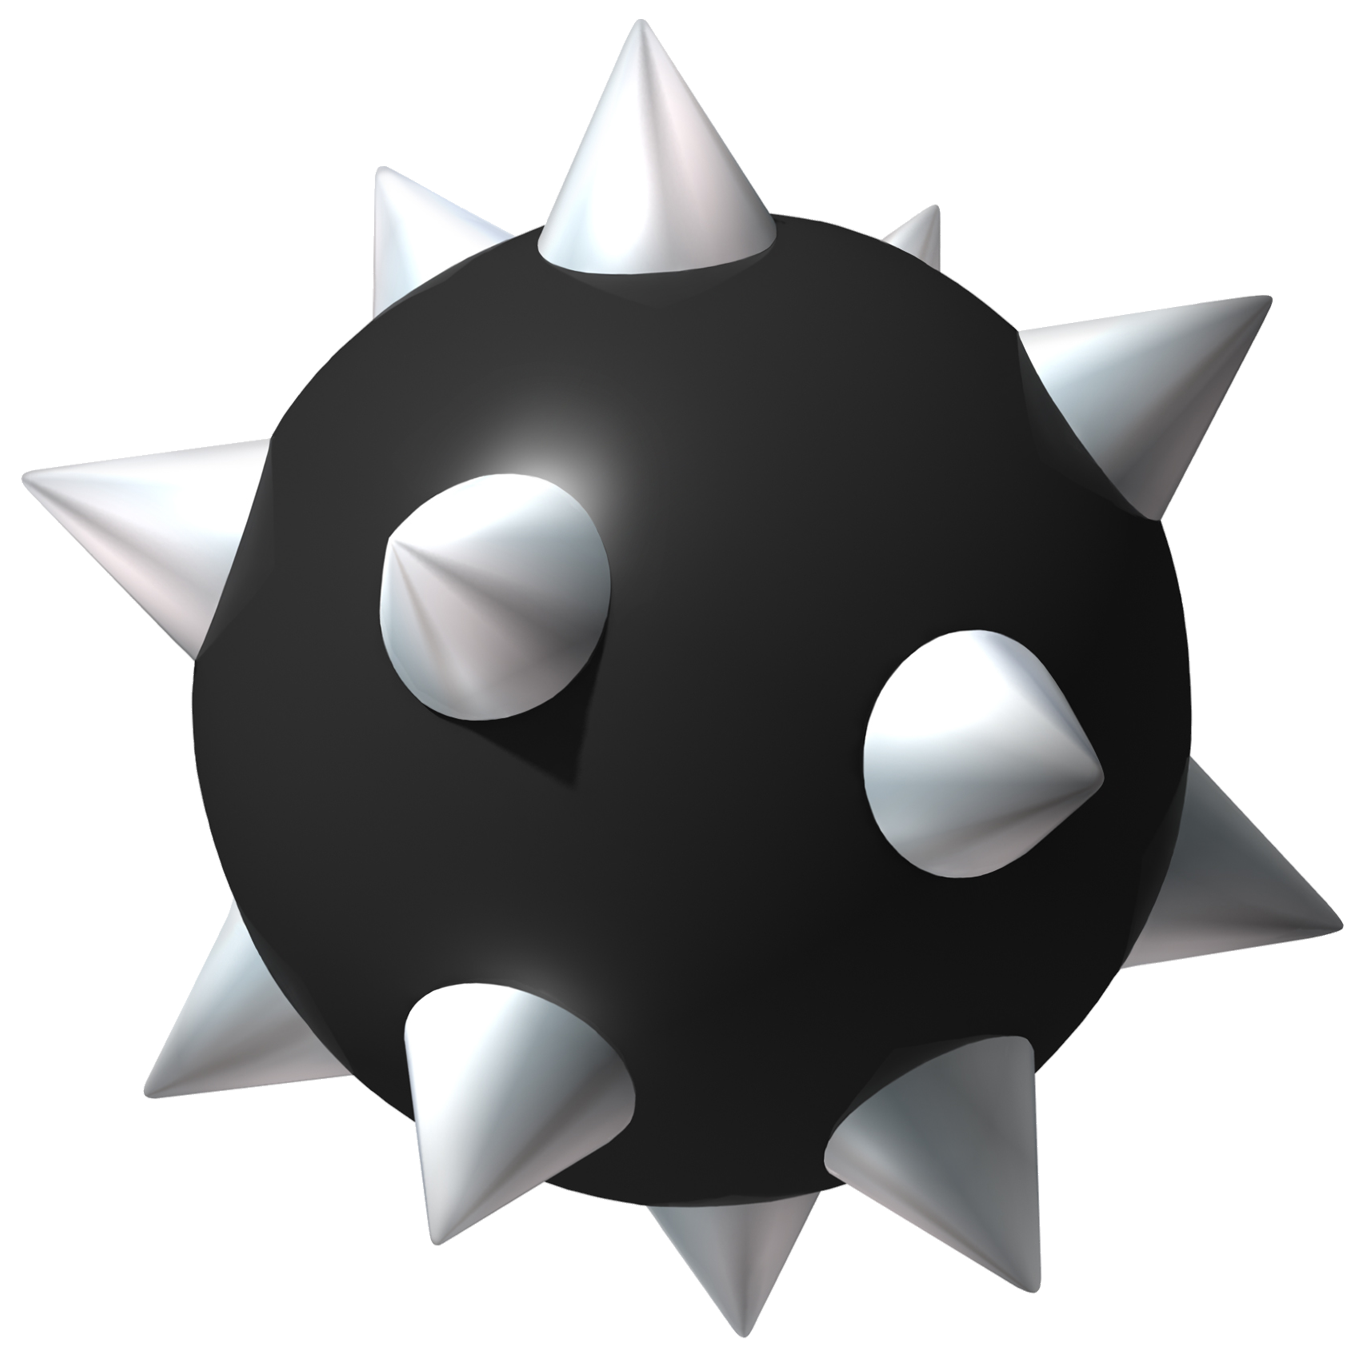 Spiked ball